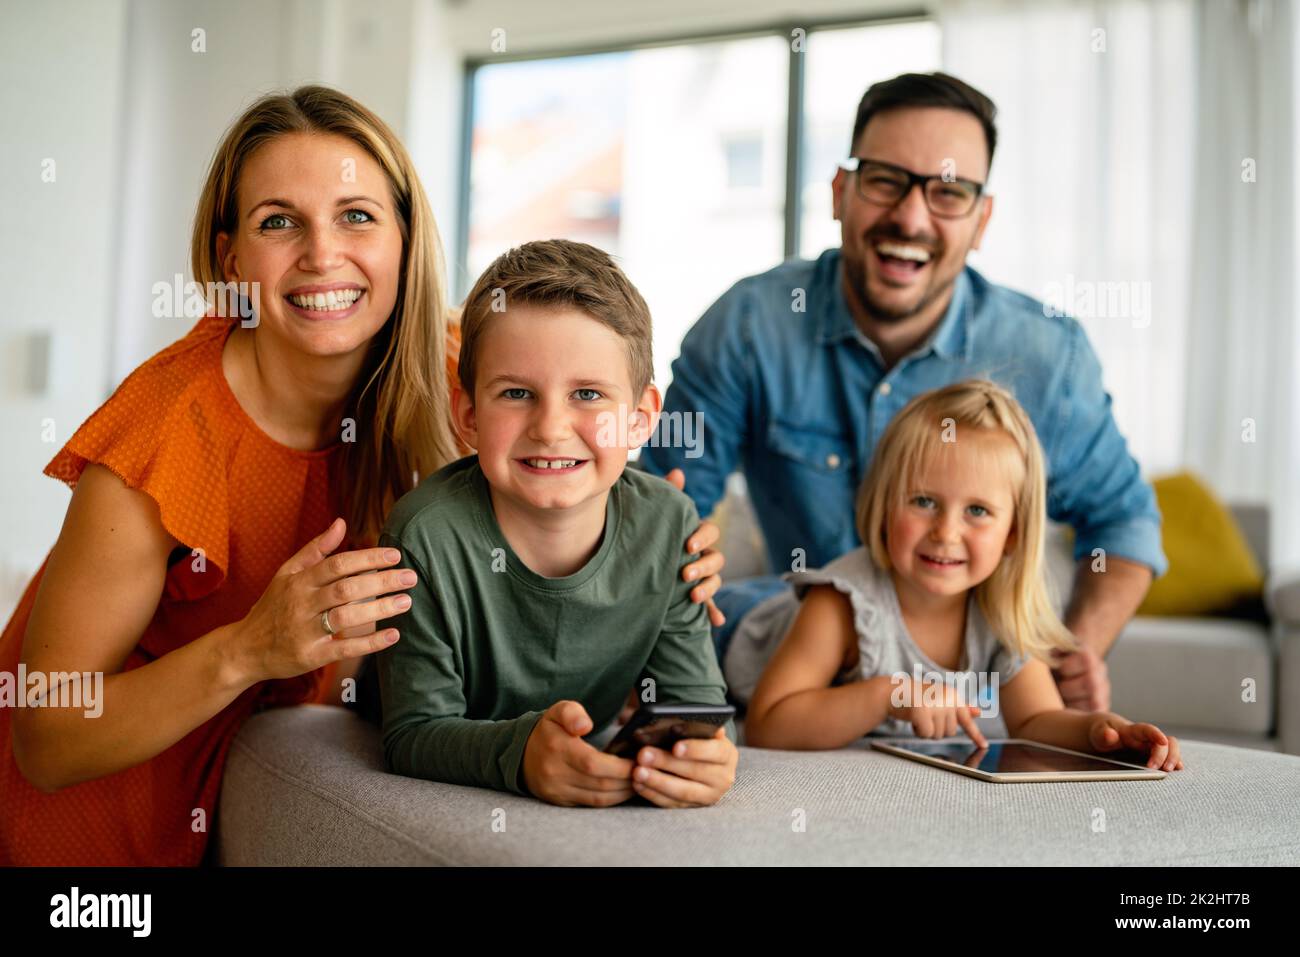 Happy young family having fun time at home. Parents with children using digital device. Stock Photo